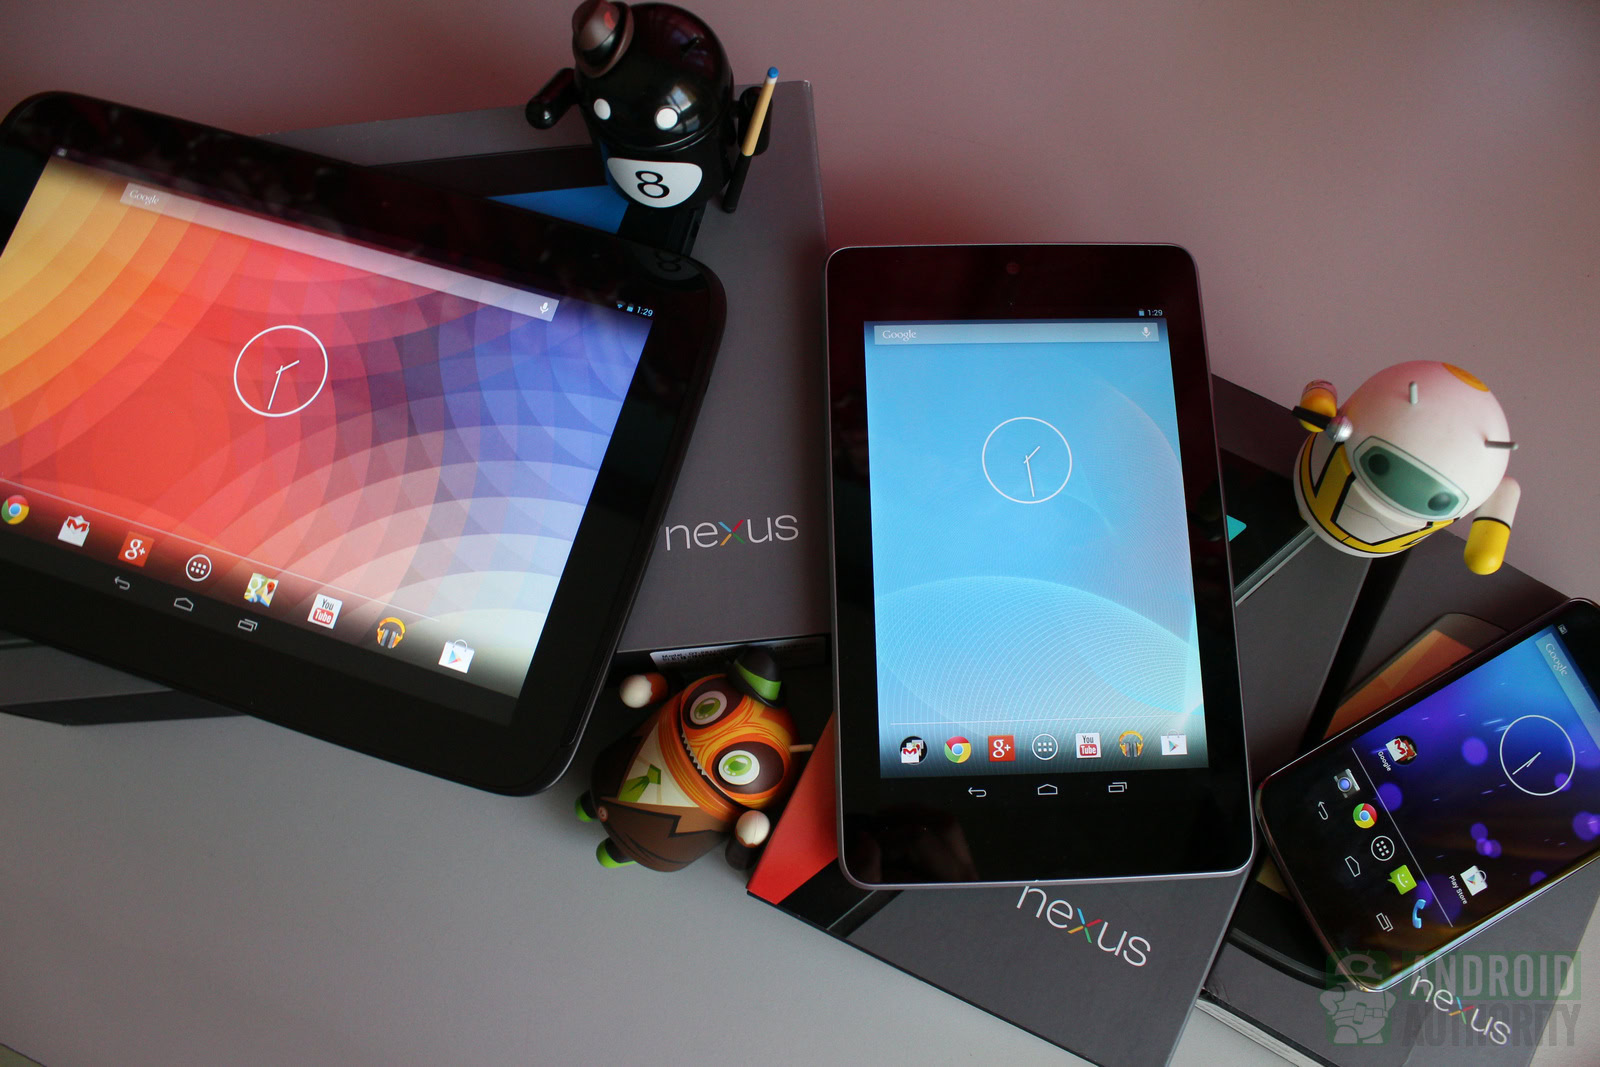 The Nexus 4 and Nexus 10 were the first devices to run Android 4.2 Jelly Bean